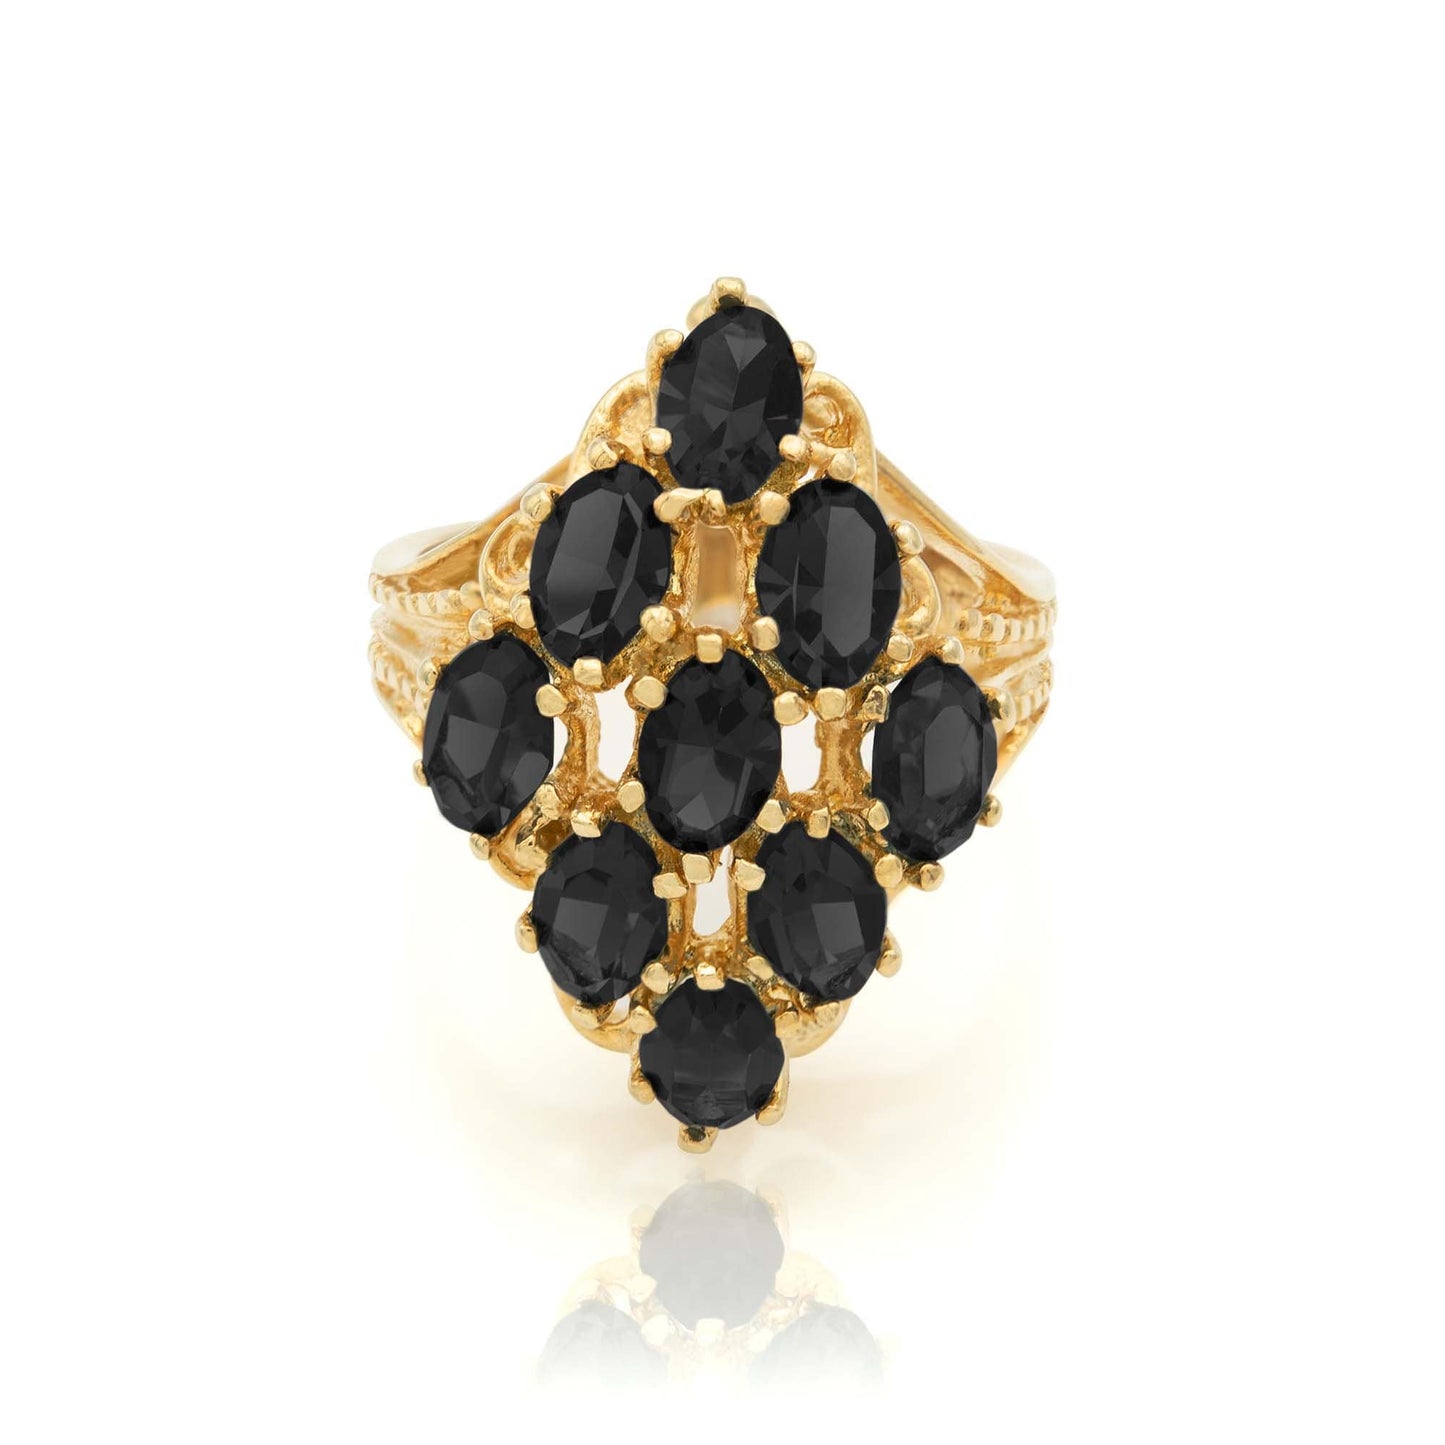 Vintage Ring Jet Black Austrian Crystal Cocktail Ring 18k Gold Antique Womans Jewlery Ornate R284 - Limited Stock - Never Worn